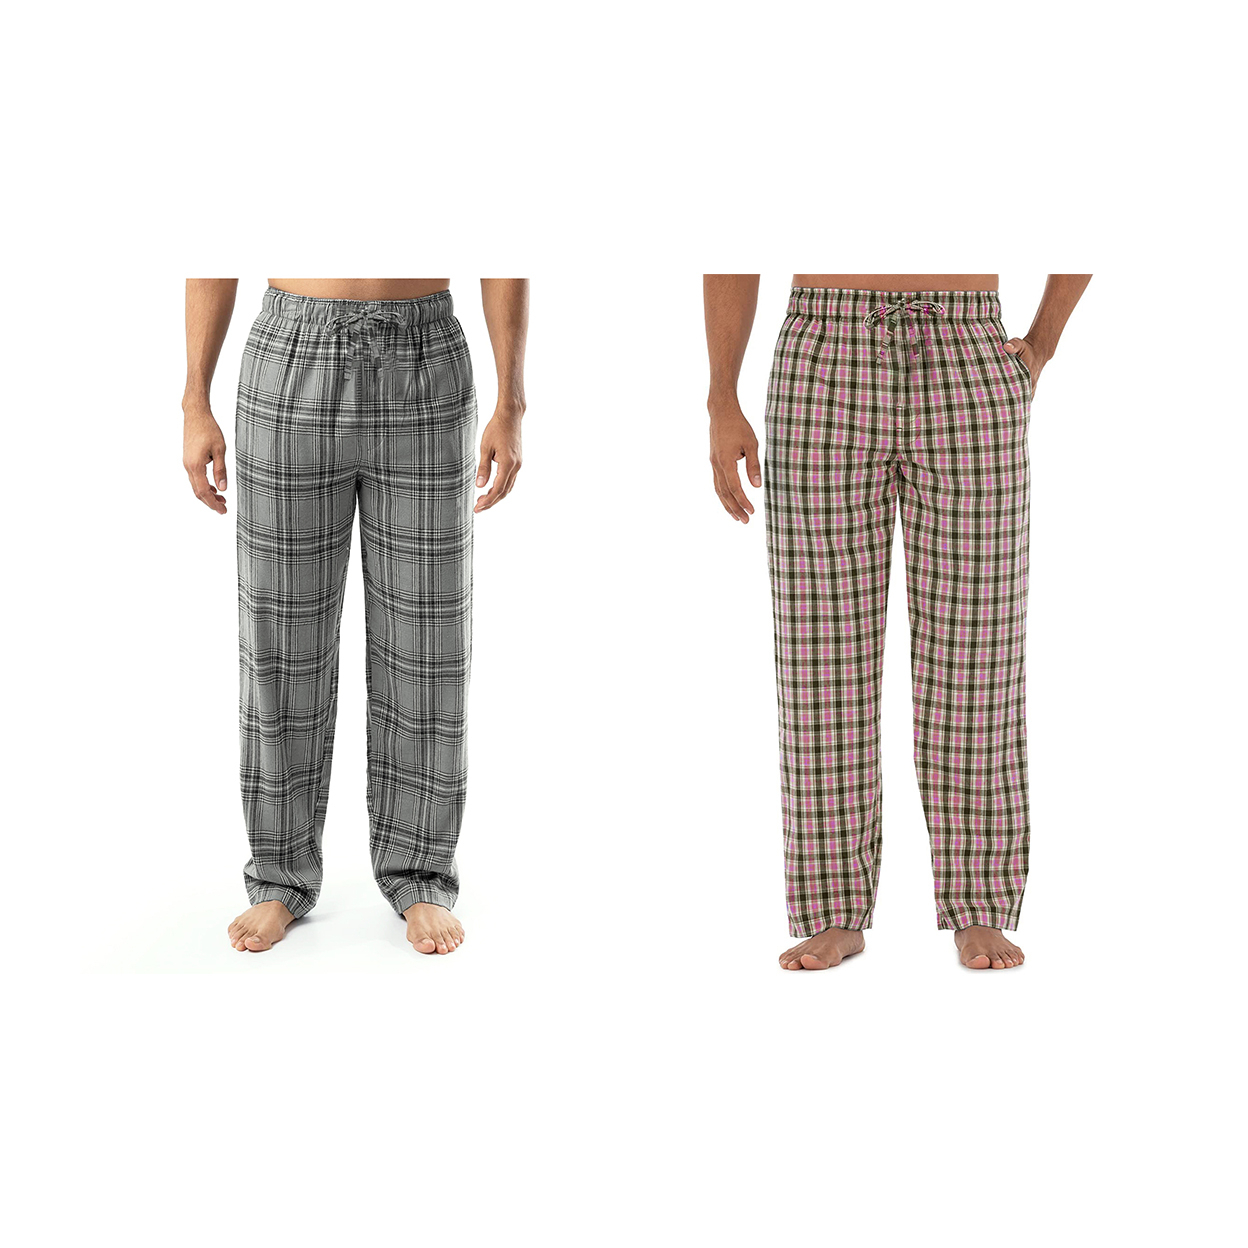 3-Pack: Men's Soft Jersey Knit Long Lounge Sleep Pants With Pockets - Solid & Plaid, 2X-Large